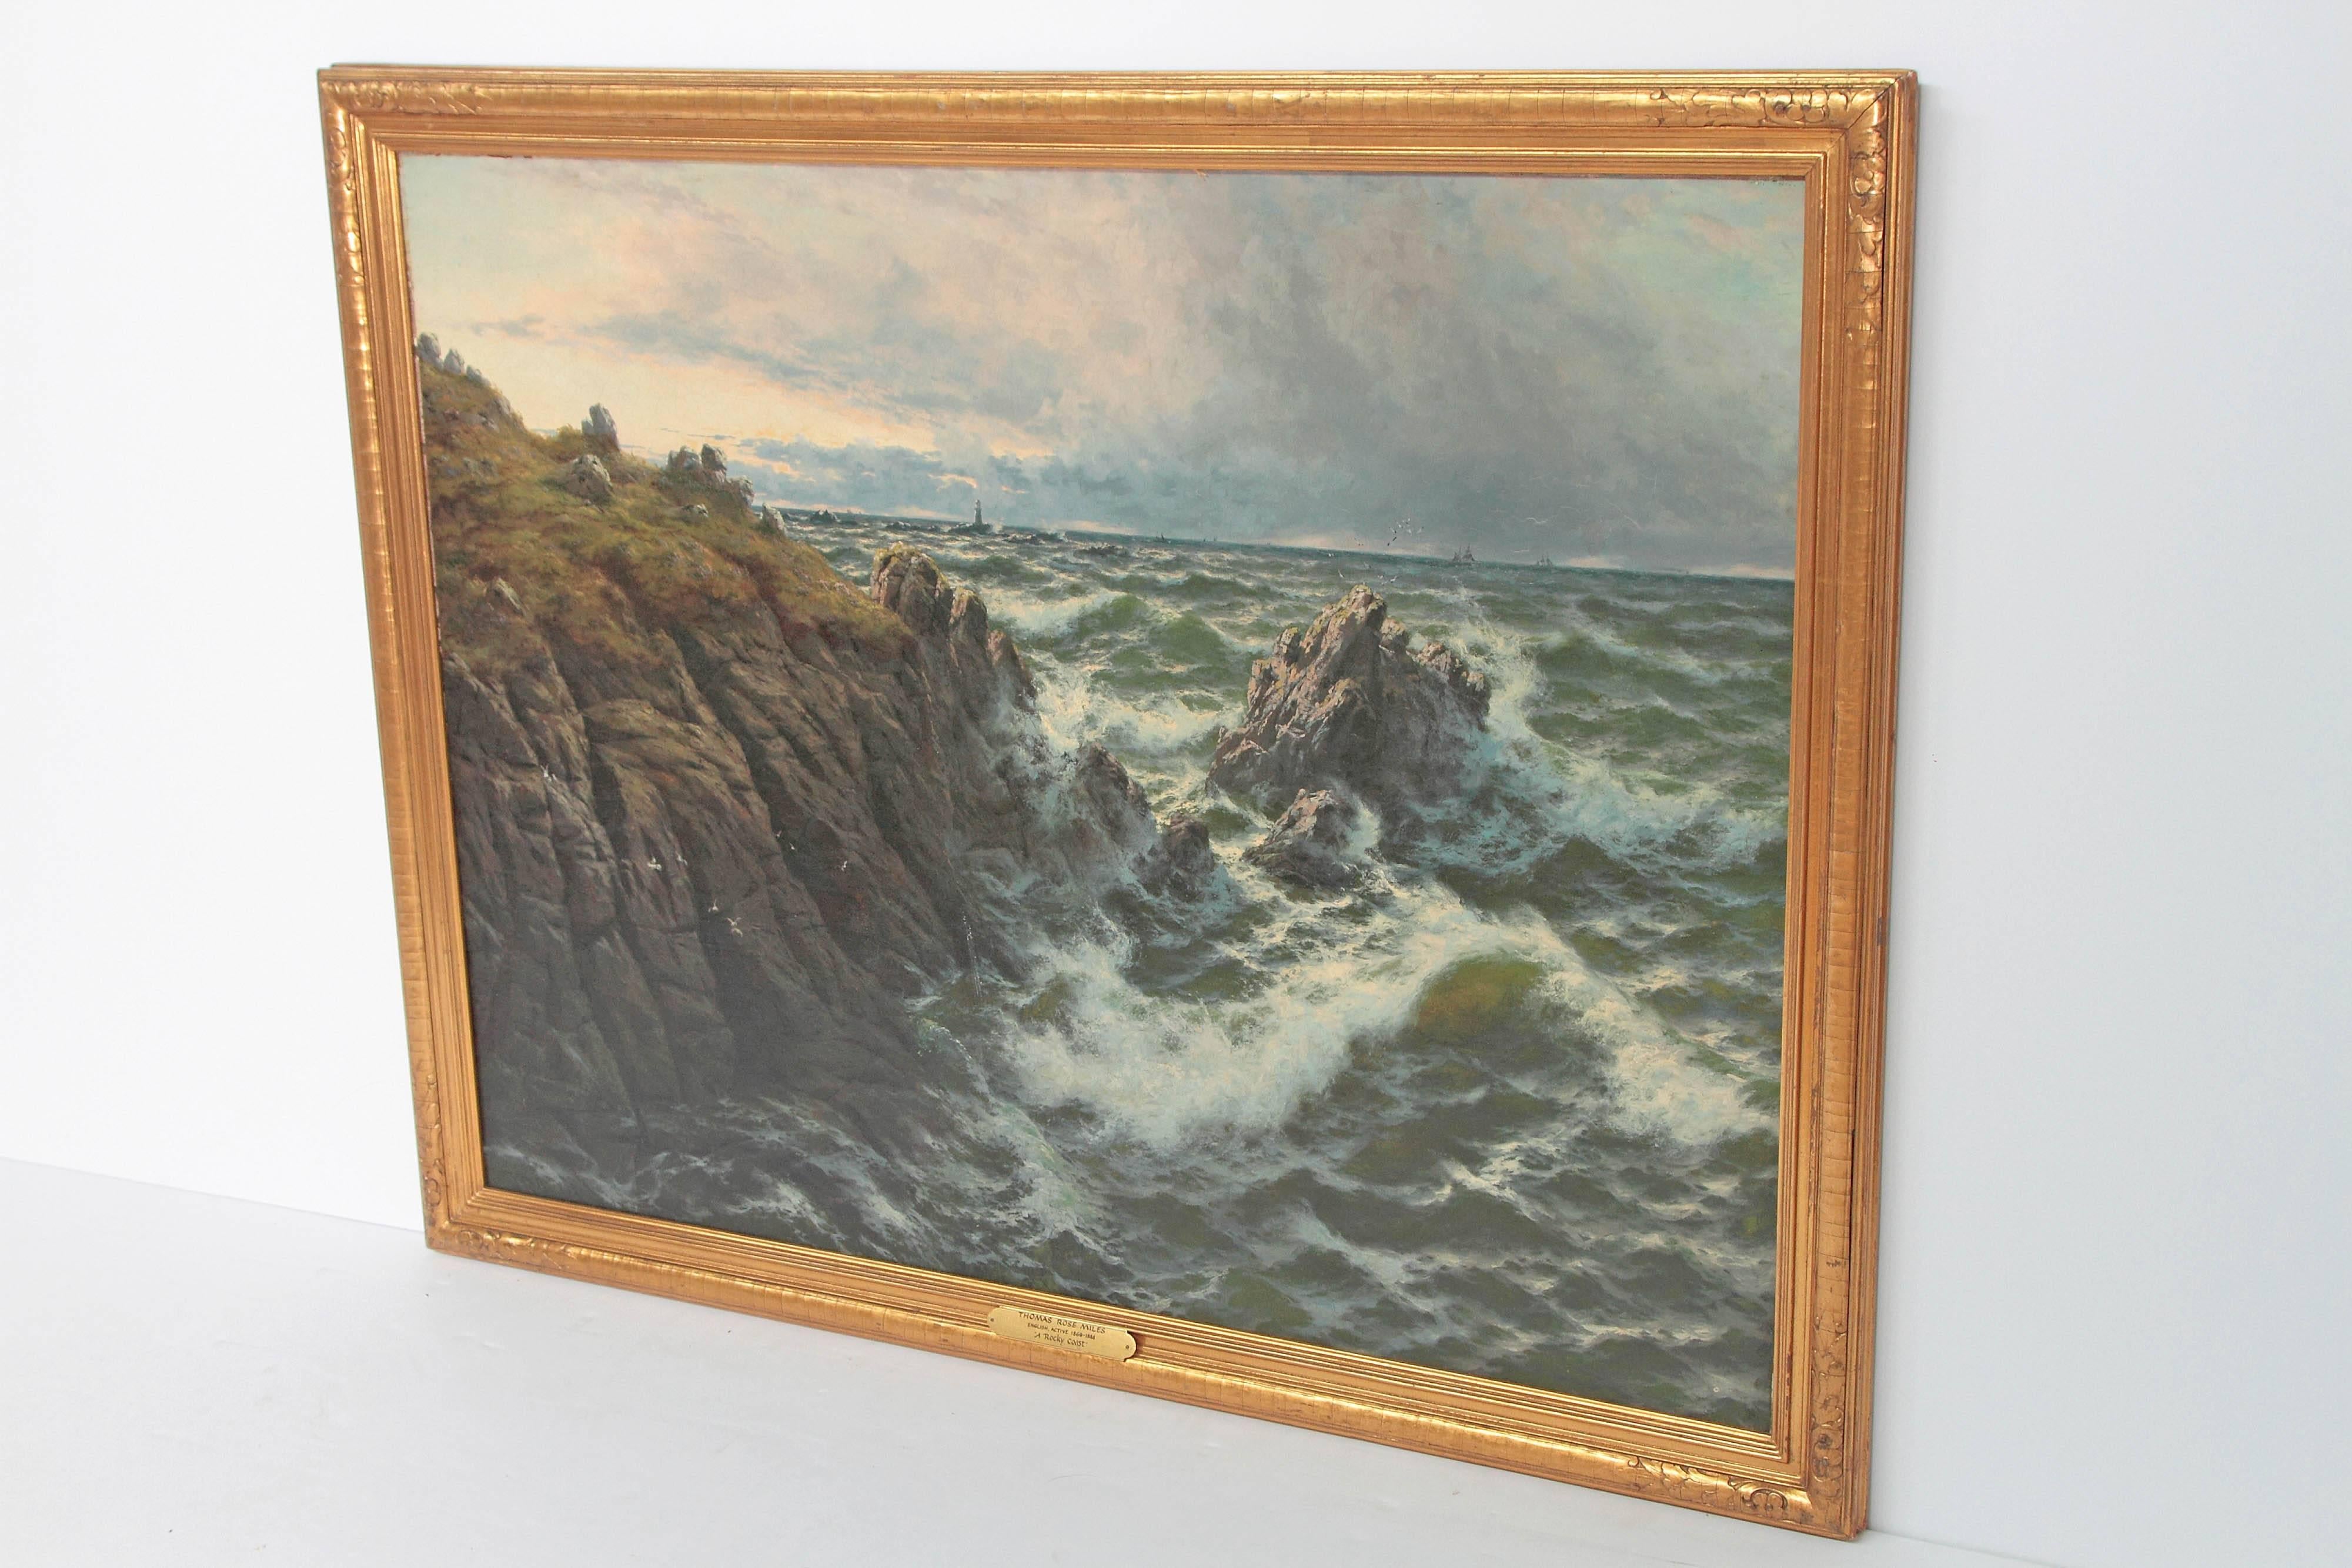 A large oil on canvas seascape by Thomas Rose Miles (1844-1916) English, active 1869-1888, signed lower left T. R. MILES.

He specialized in marine scenes, often the N.E. coast of England. He worked in London and exhibited in the Royal Academy,